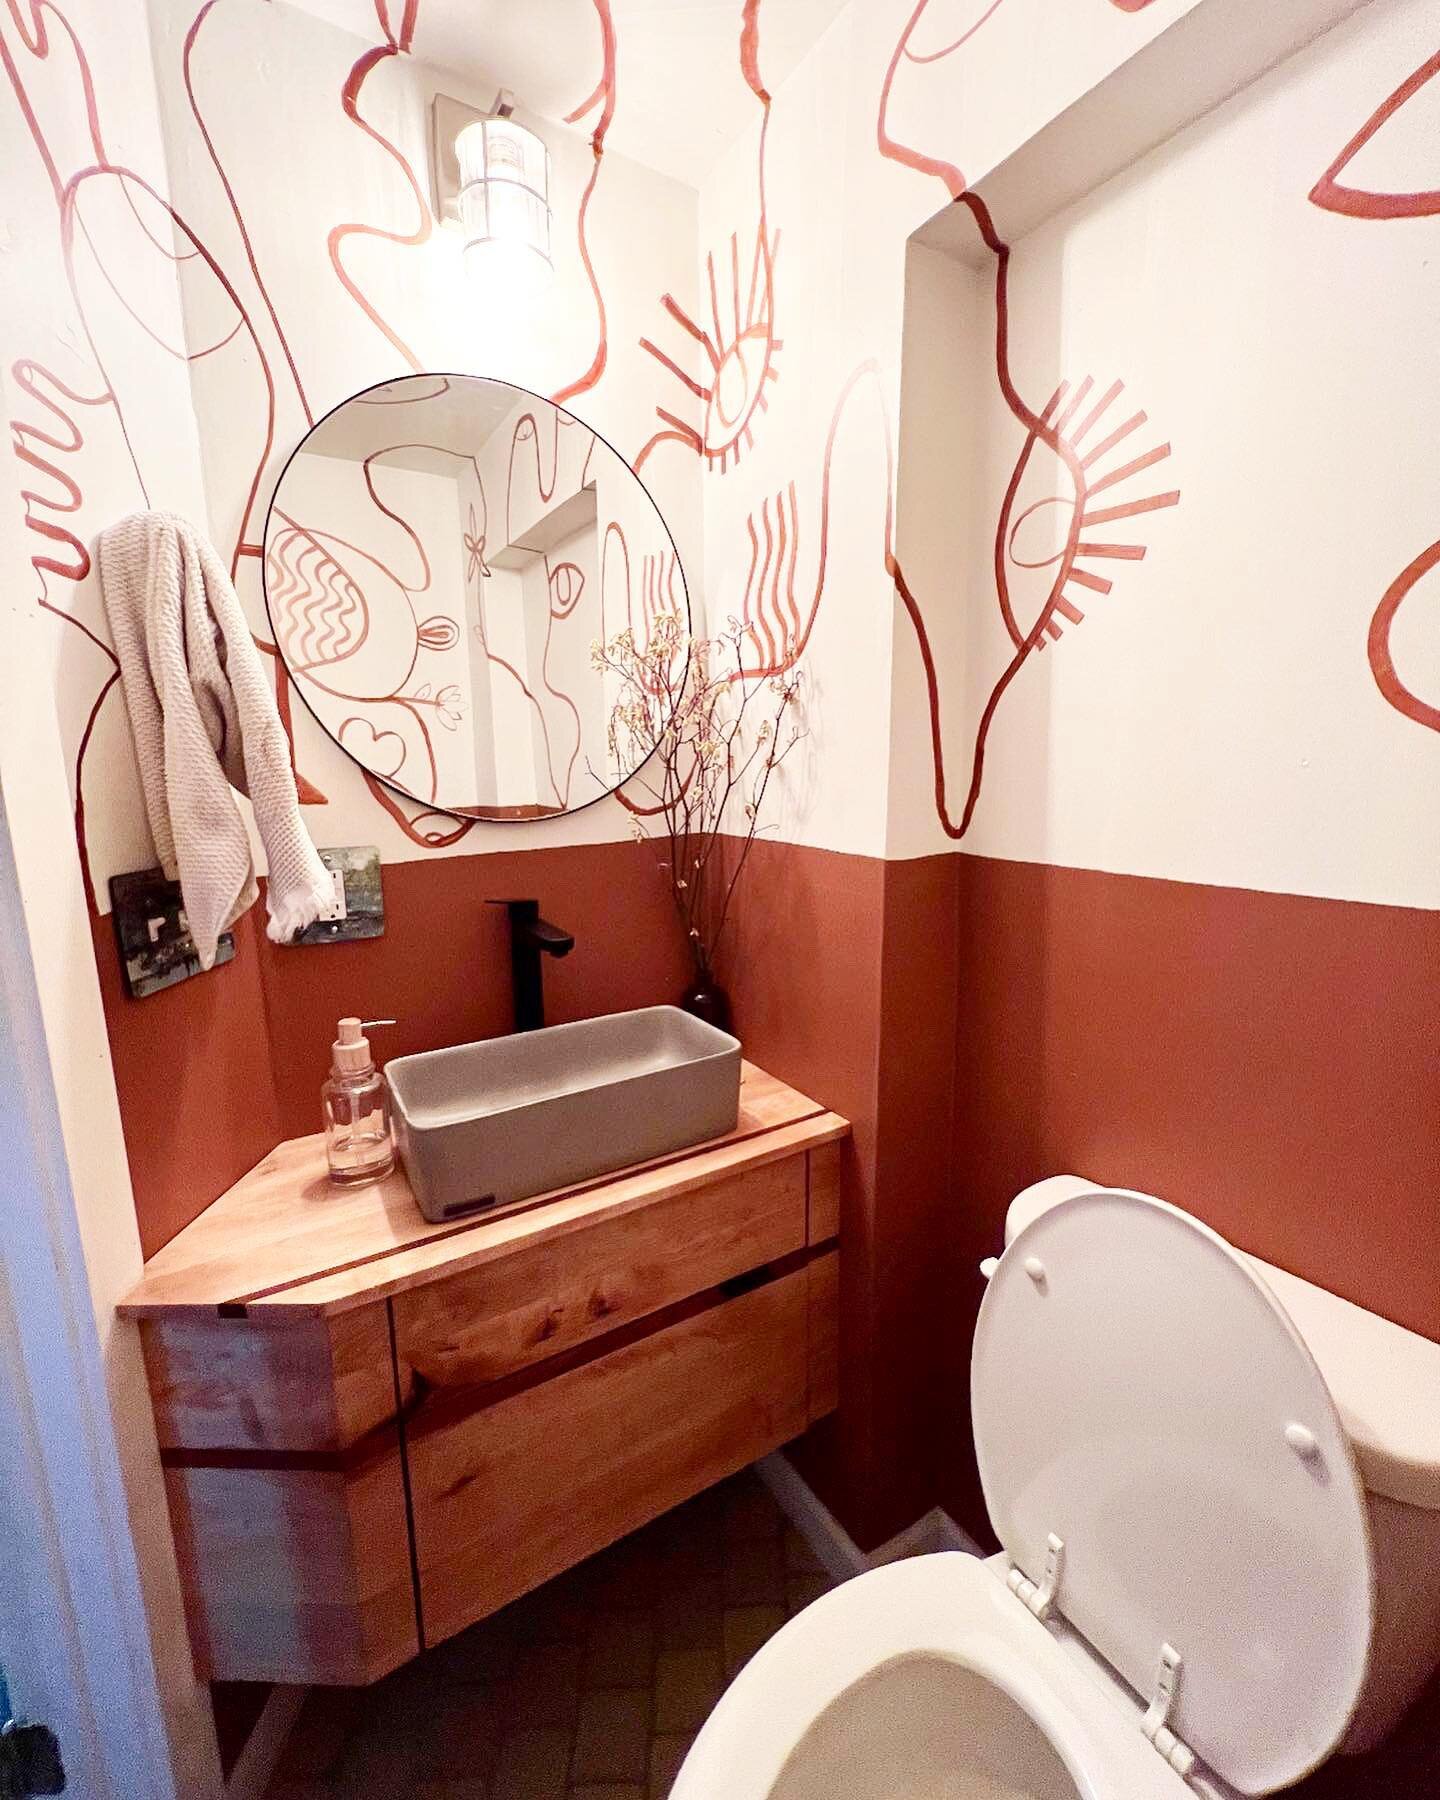 An additional bathroom adds so much value and convenience to a home. This small but unique space was beautifully designed in collaboration with homeowner, @spoonandhook and her creative abstract hand drawn mural. Custom vanity created by Corvus.